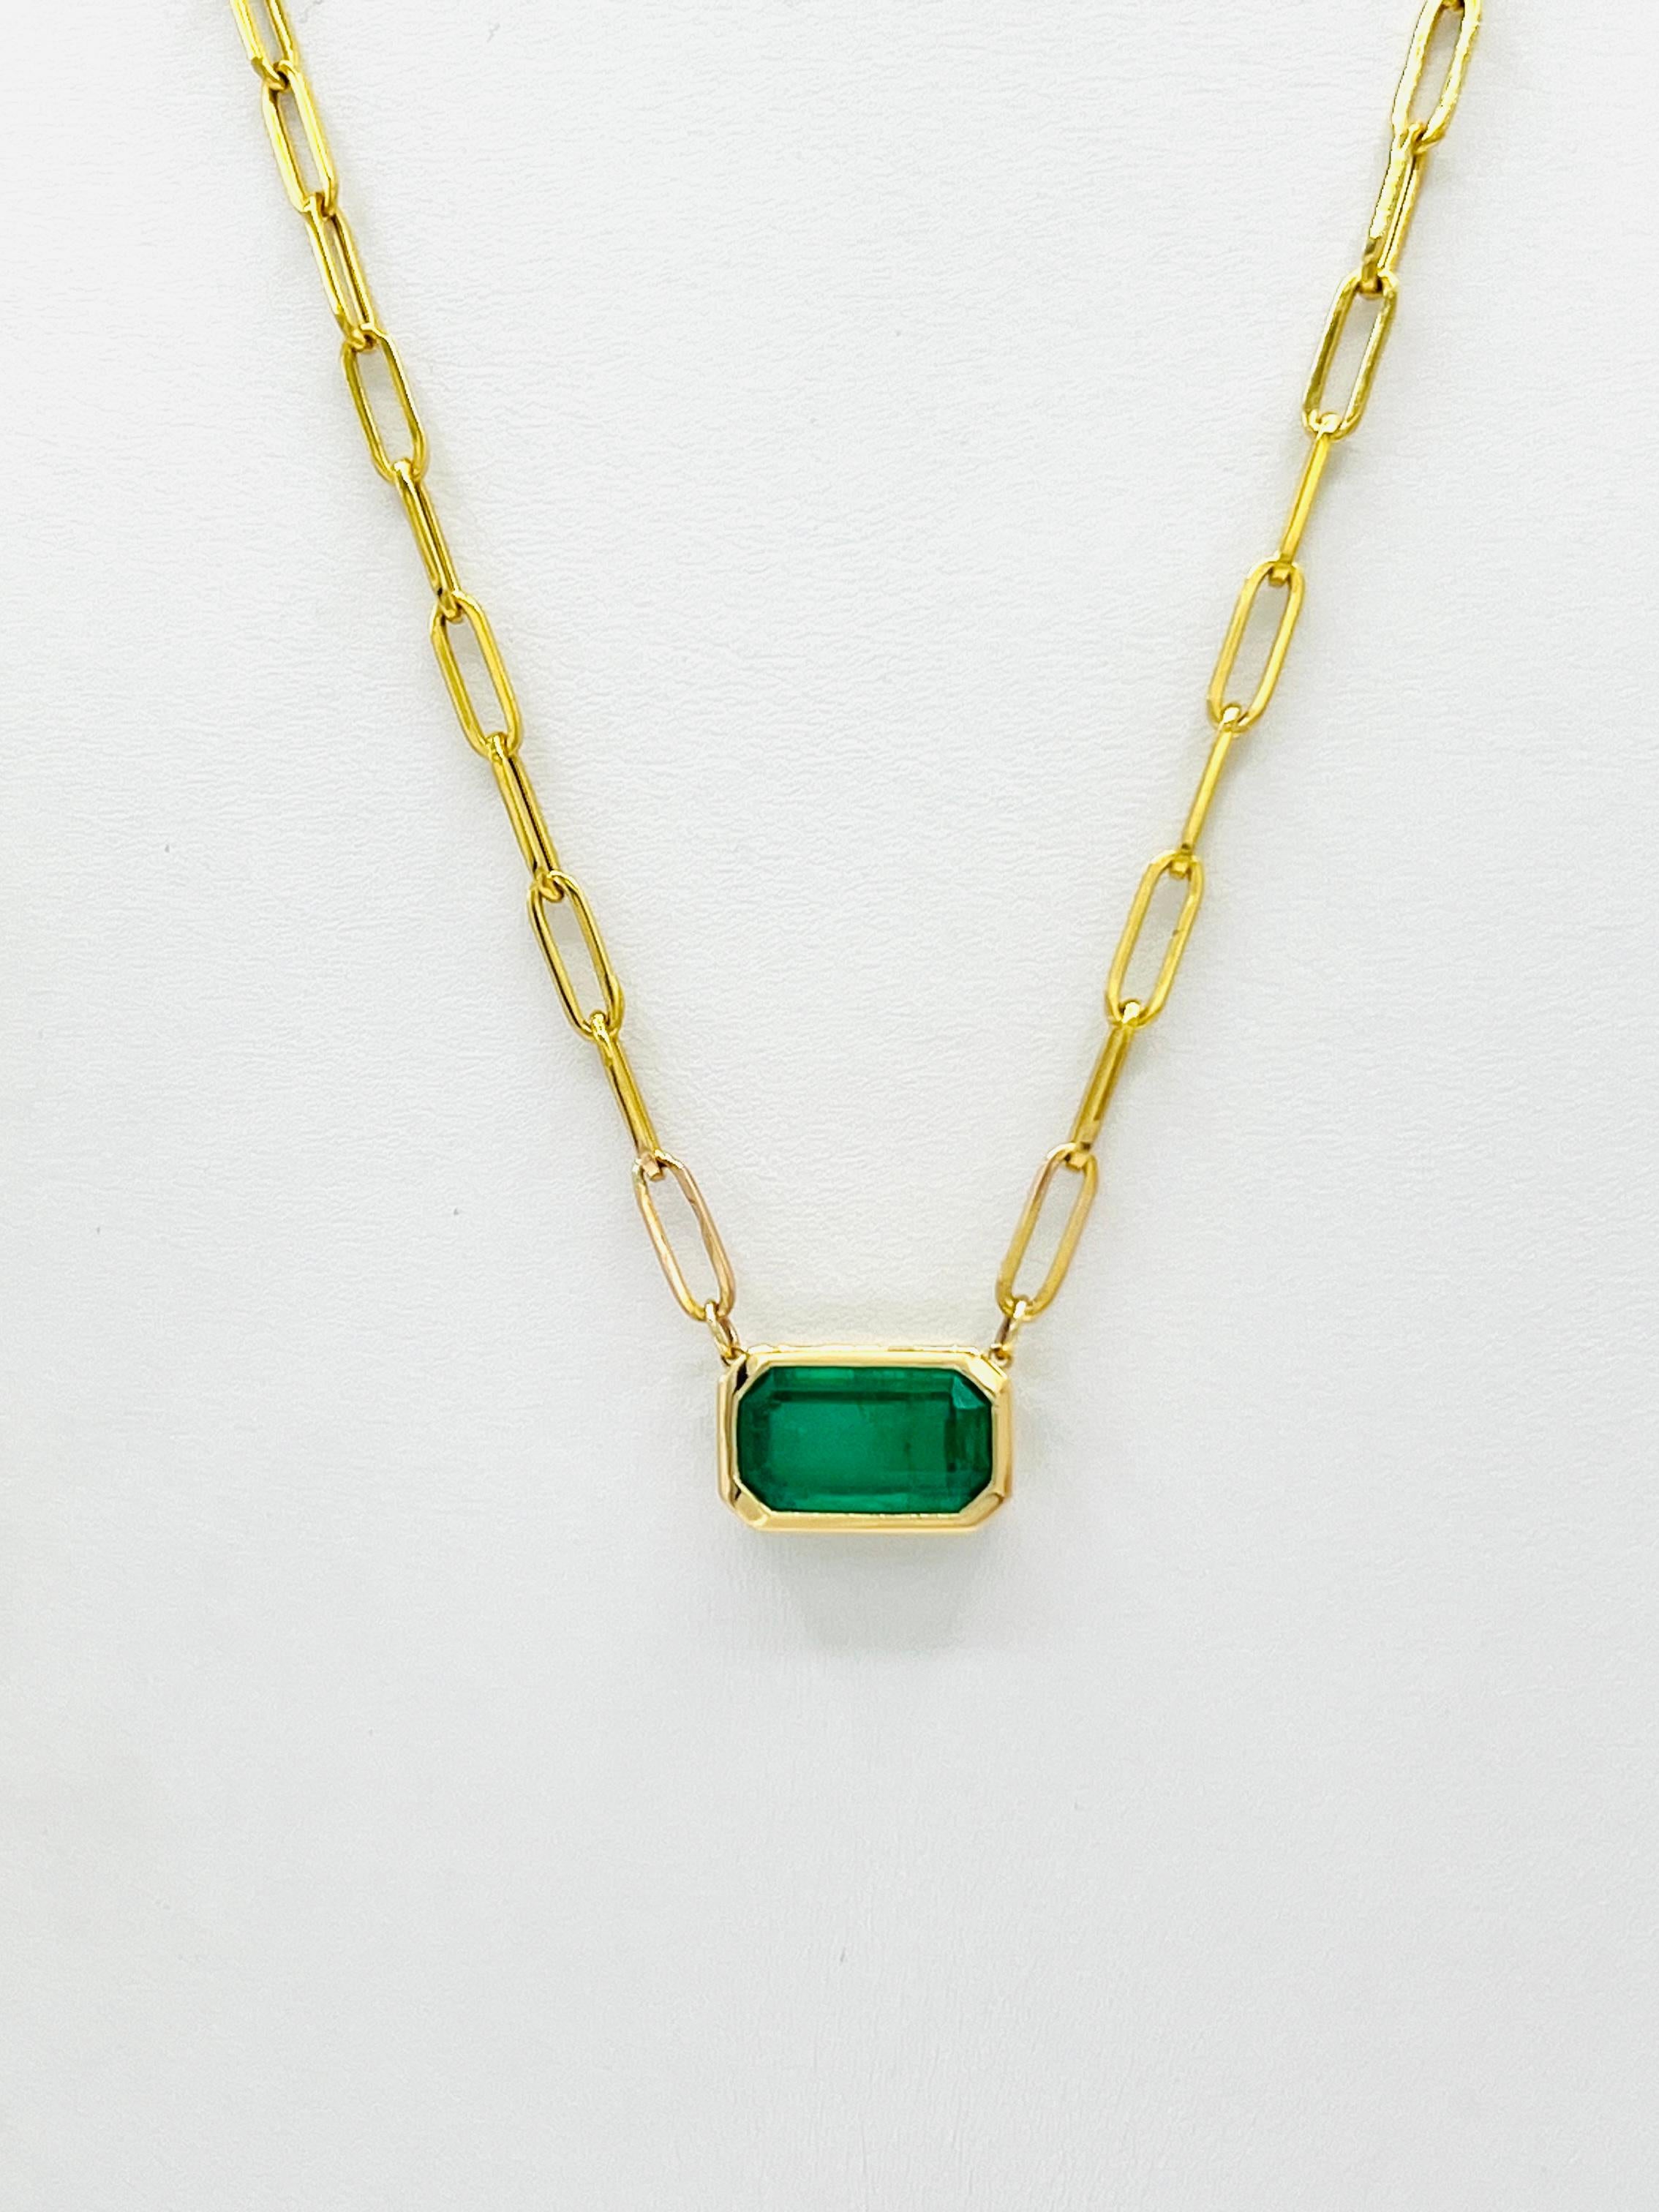 Emerald Bezel Paperclip Chain Necklace in 14K Yellow Gold In New Condition For Sale In Los Angeles, CA